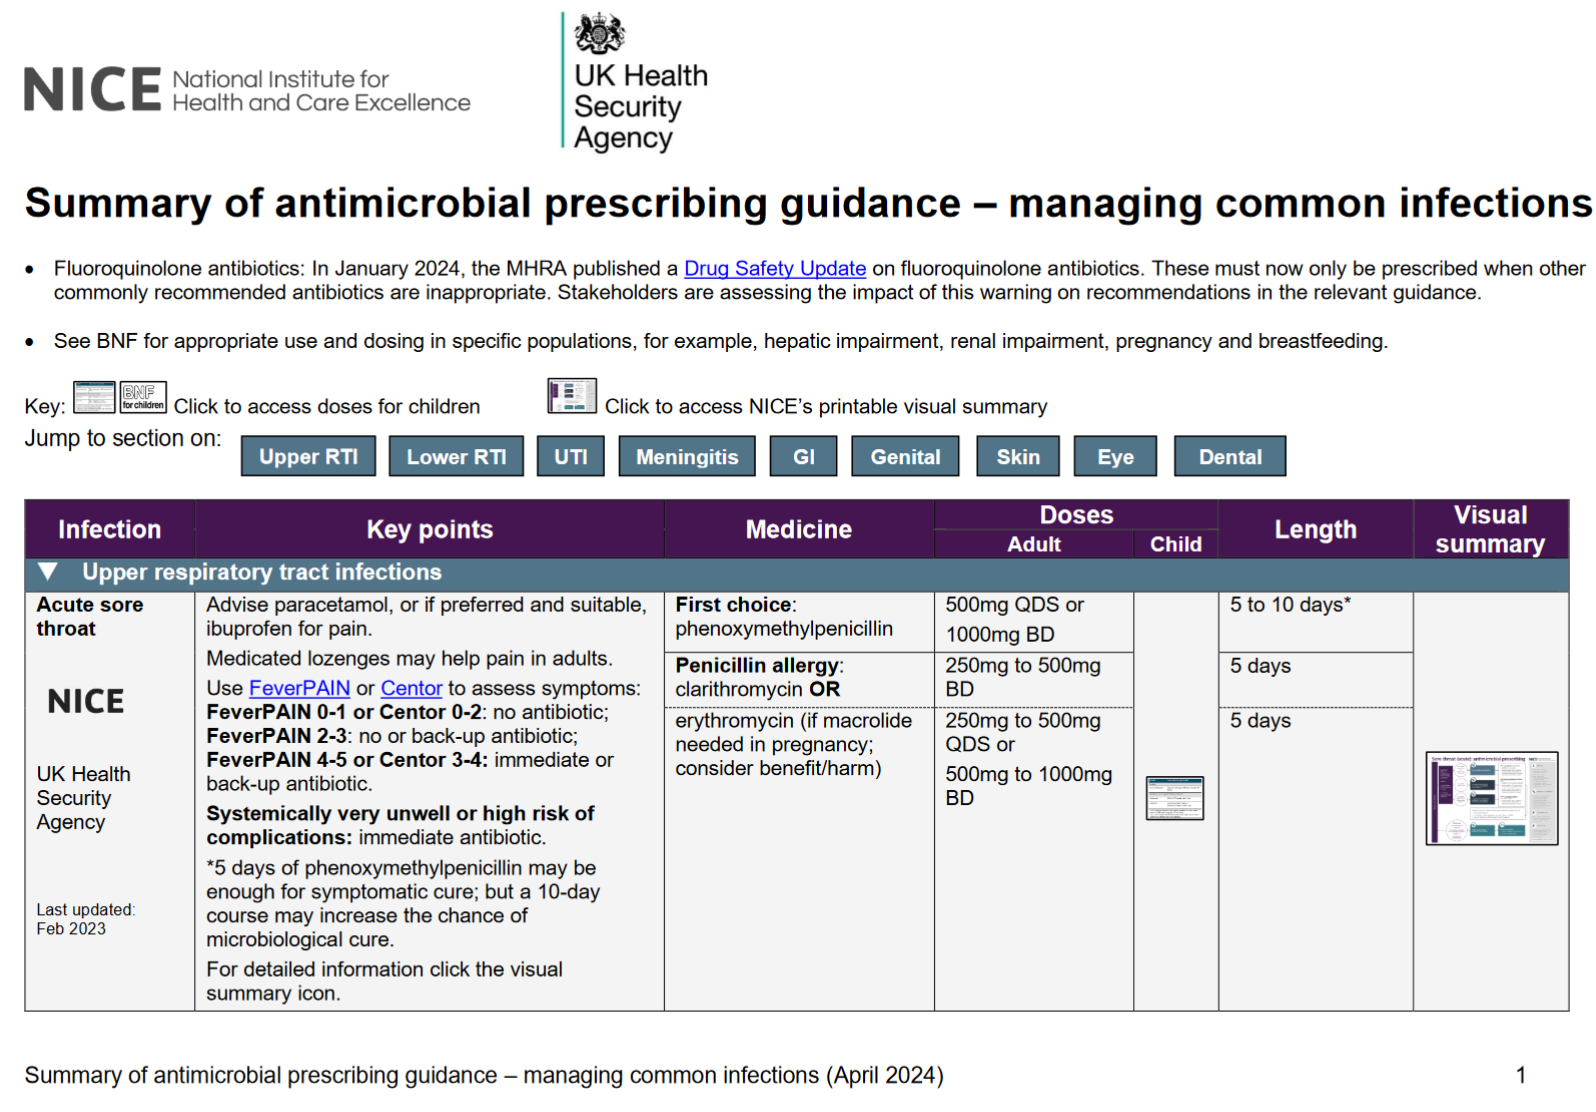 A screenshot of the summary of antimicrobial prescribing guidance table, with information laid out across seven columns. 